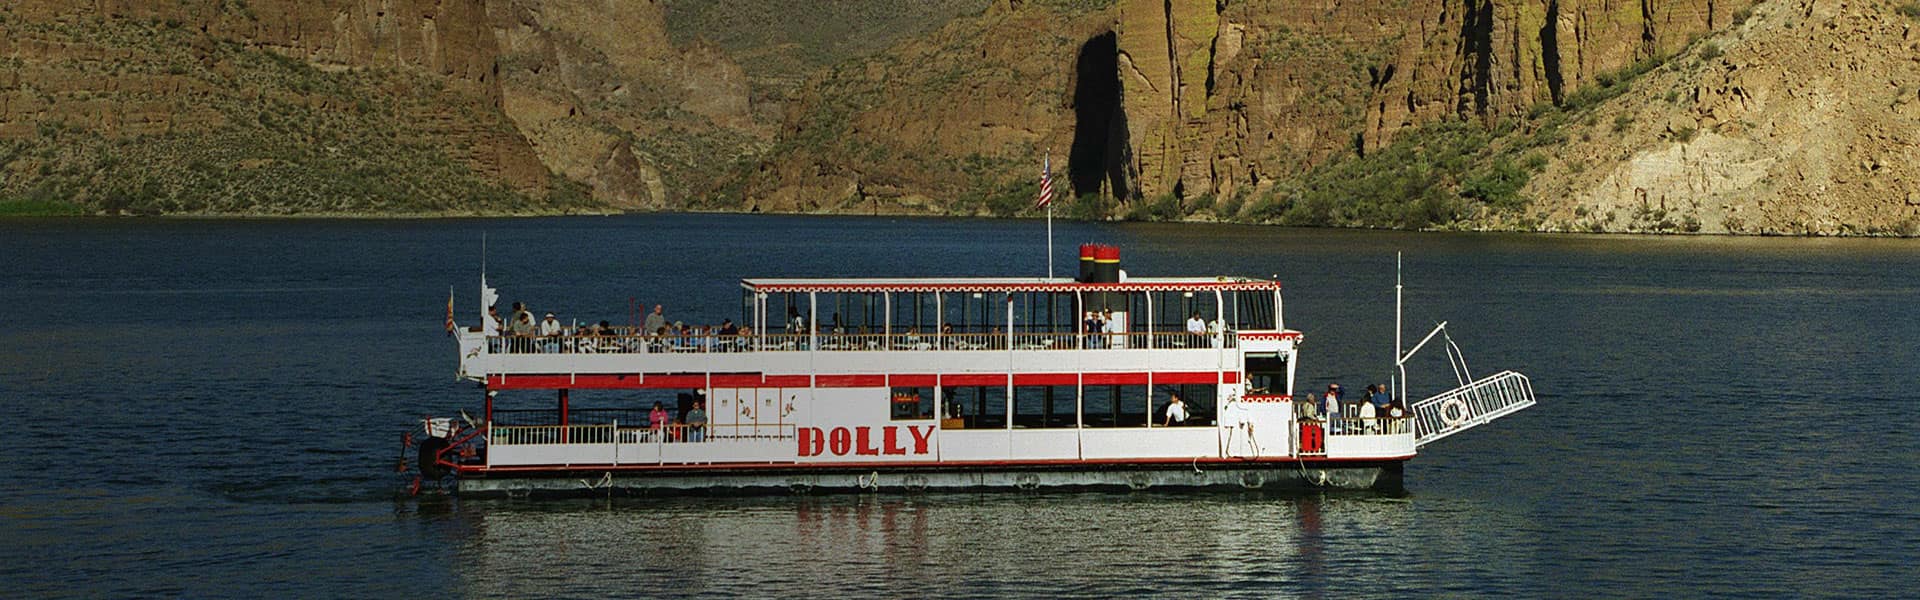 Apache Trail & Dolly Steamboat Van Tours